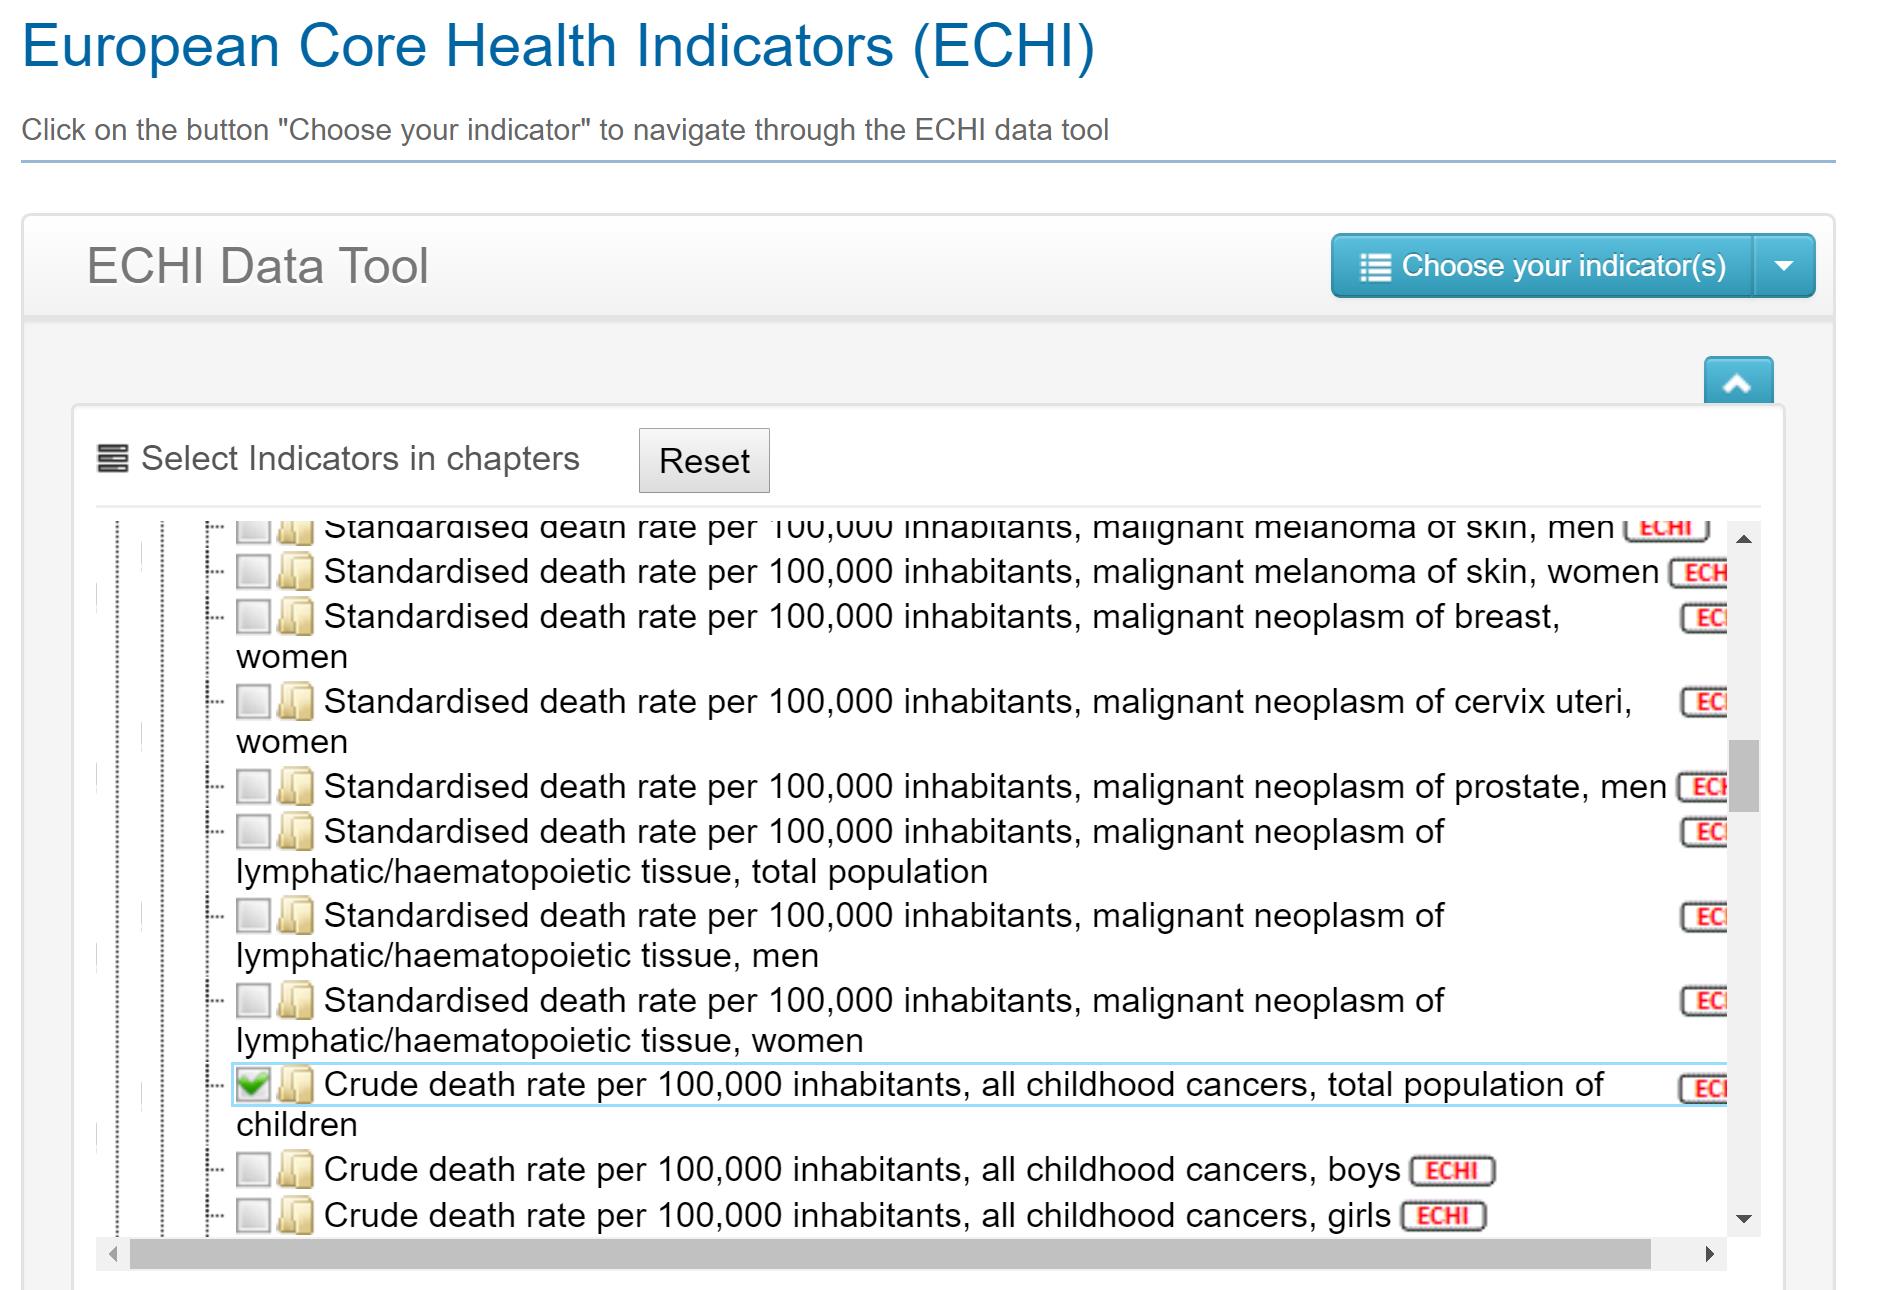 Screenshot similar to the image above. Now in the sub-category Disease-specific mortality, there are many indicators when you click on the mark before it. Scroll down until you find the indicator, Crude death rate per 100,000 inhabitants, all childhood cancers, total population of children.